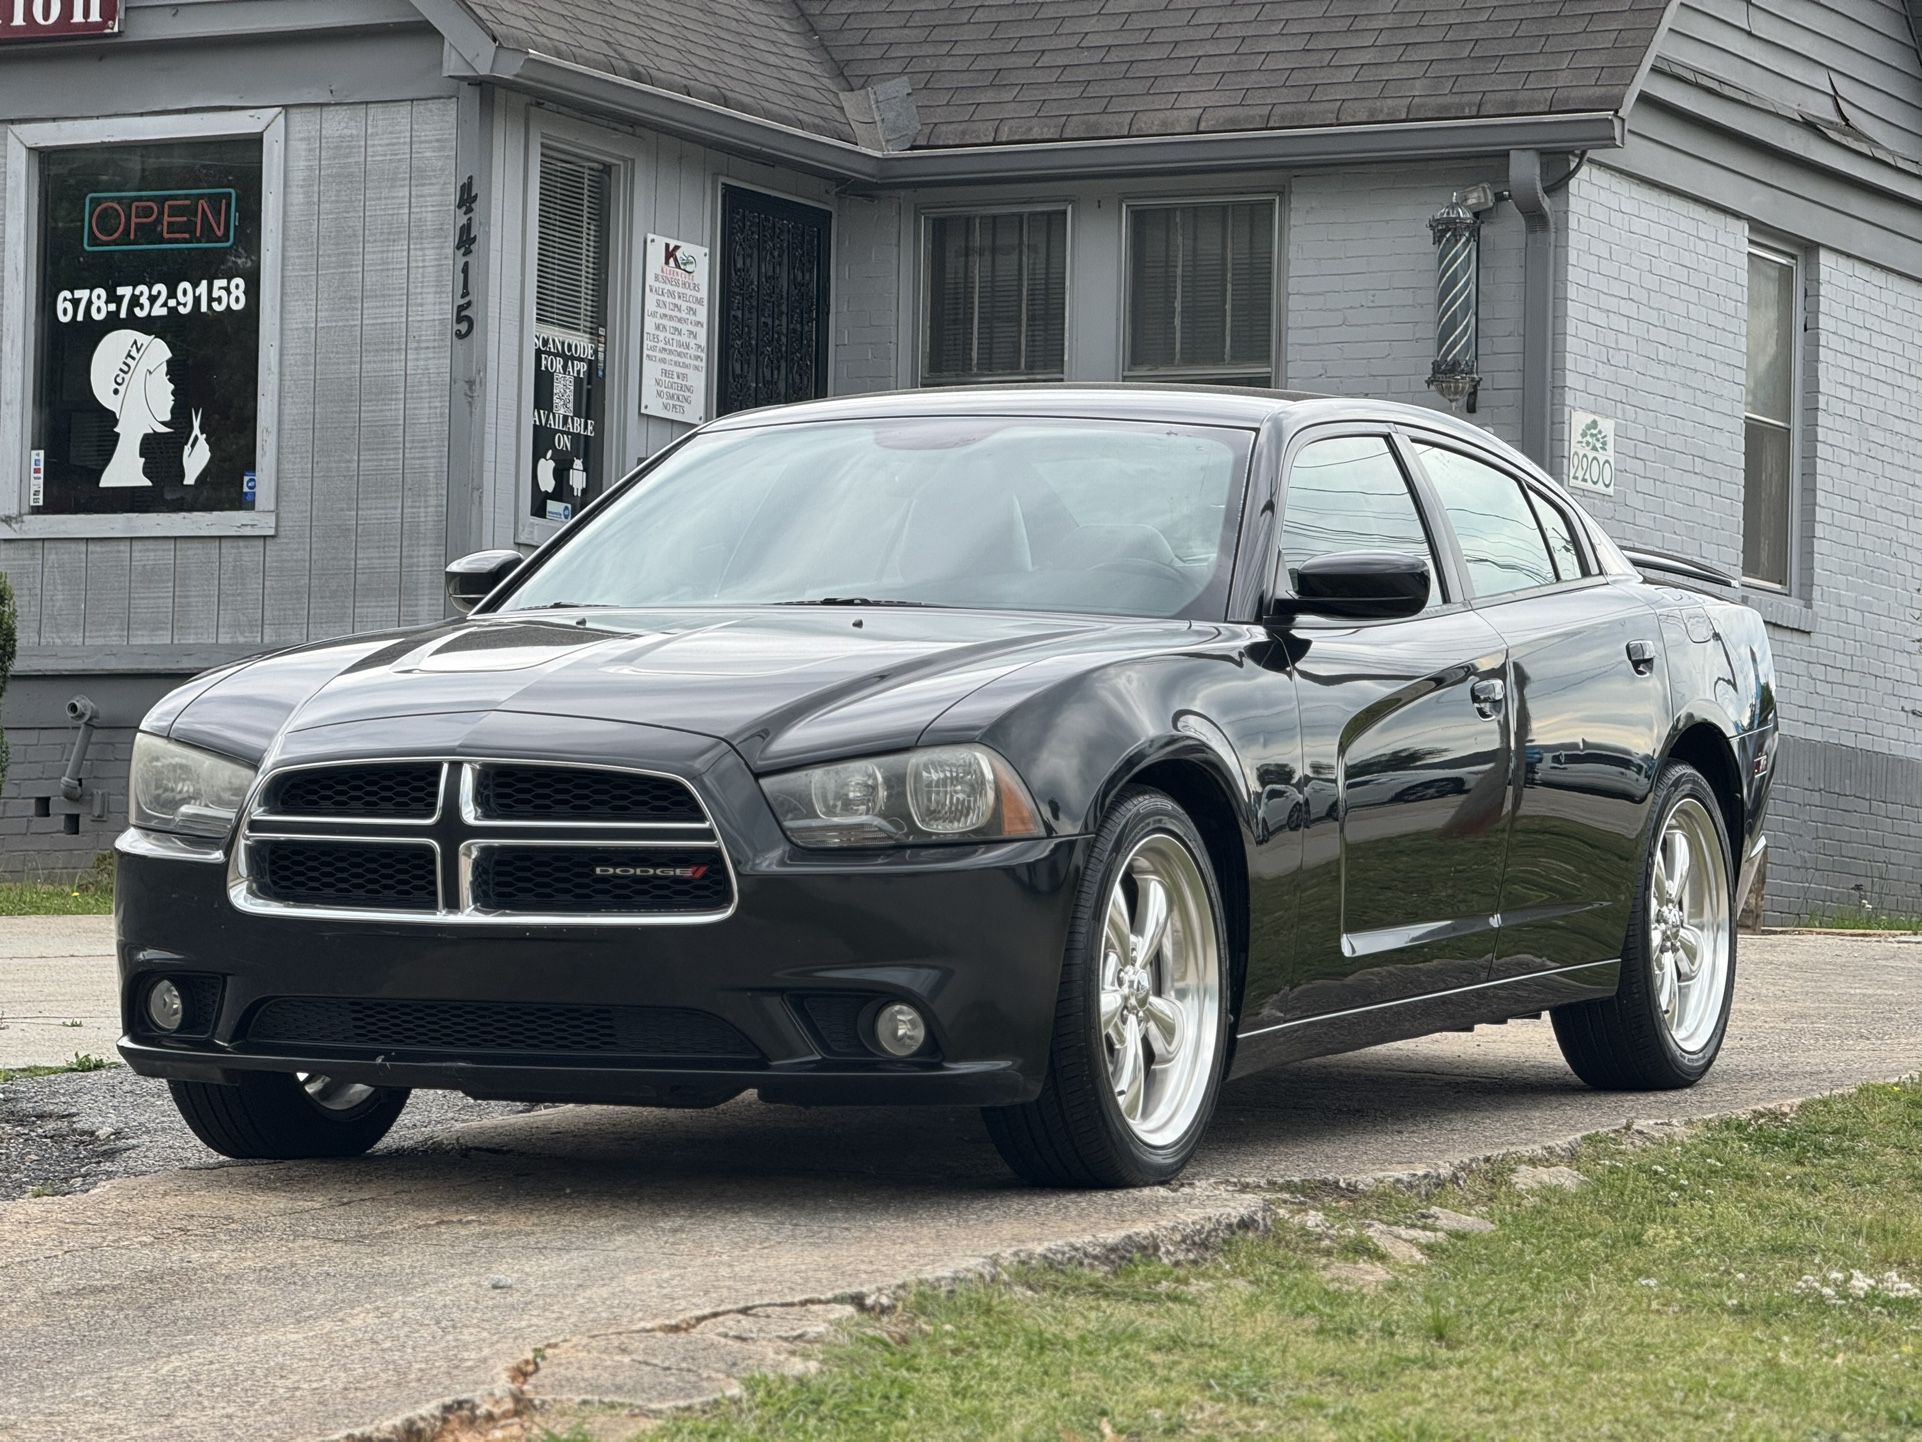 2014 Dodge Charger